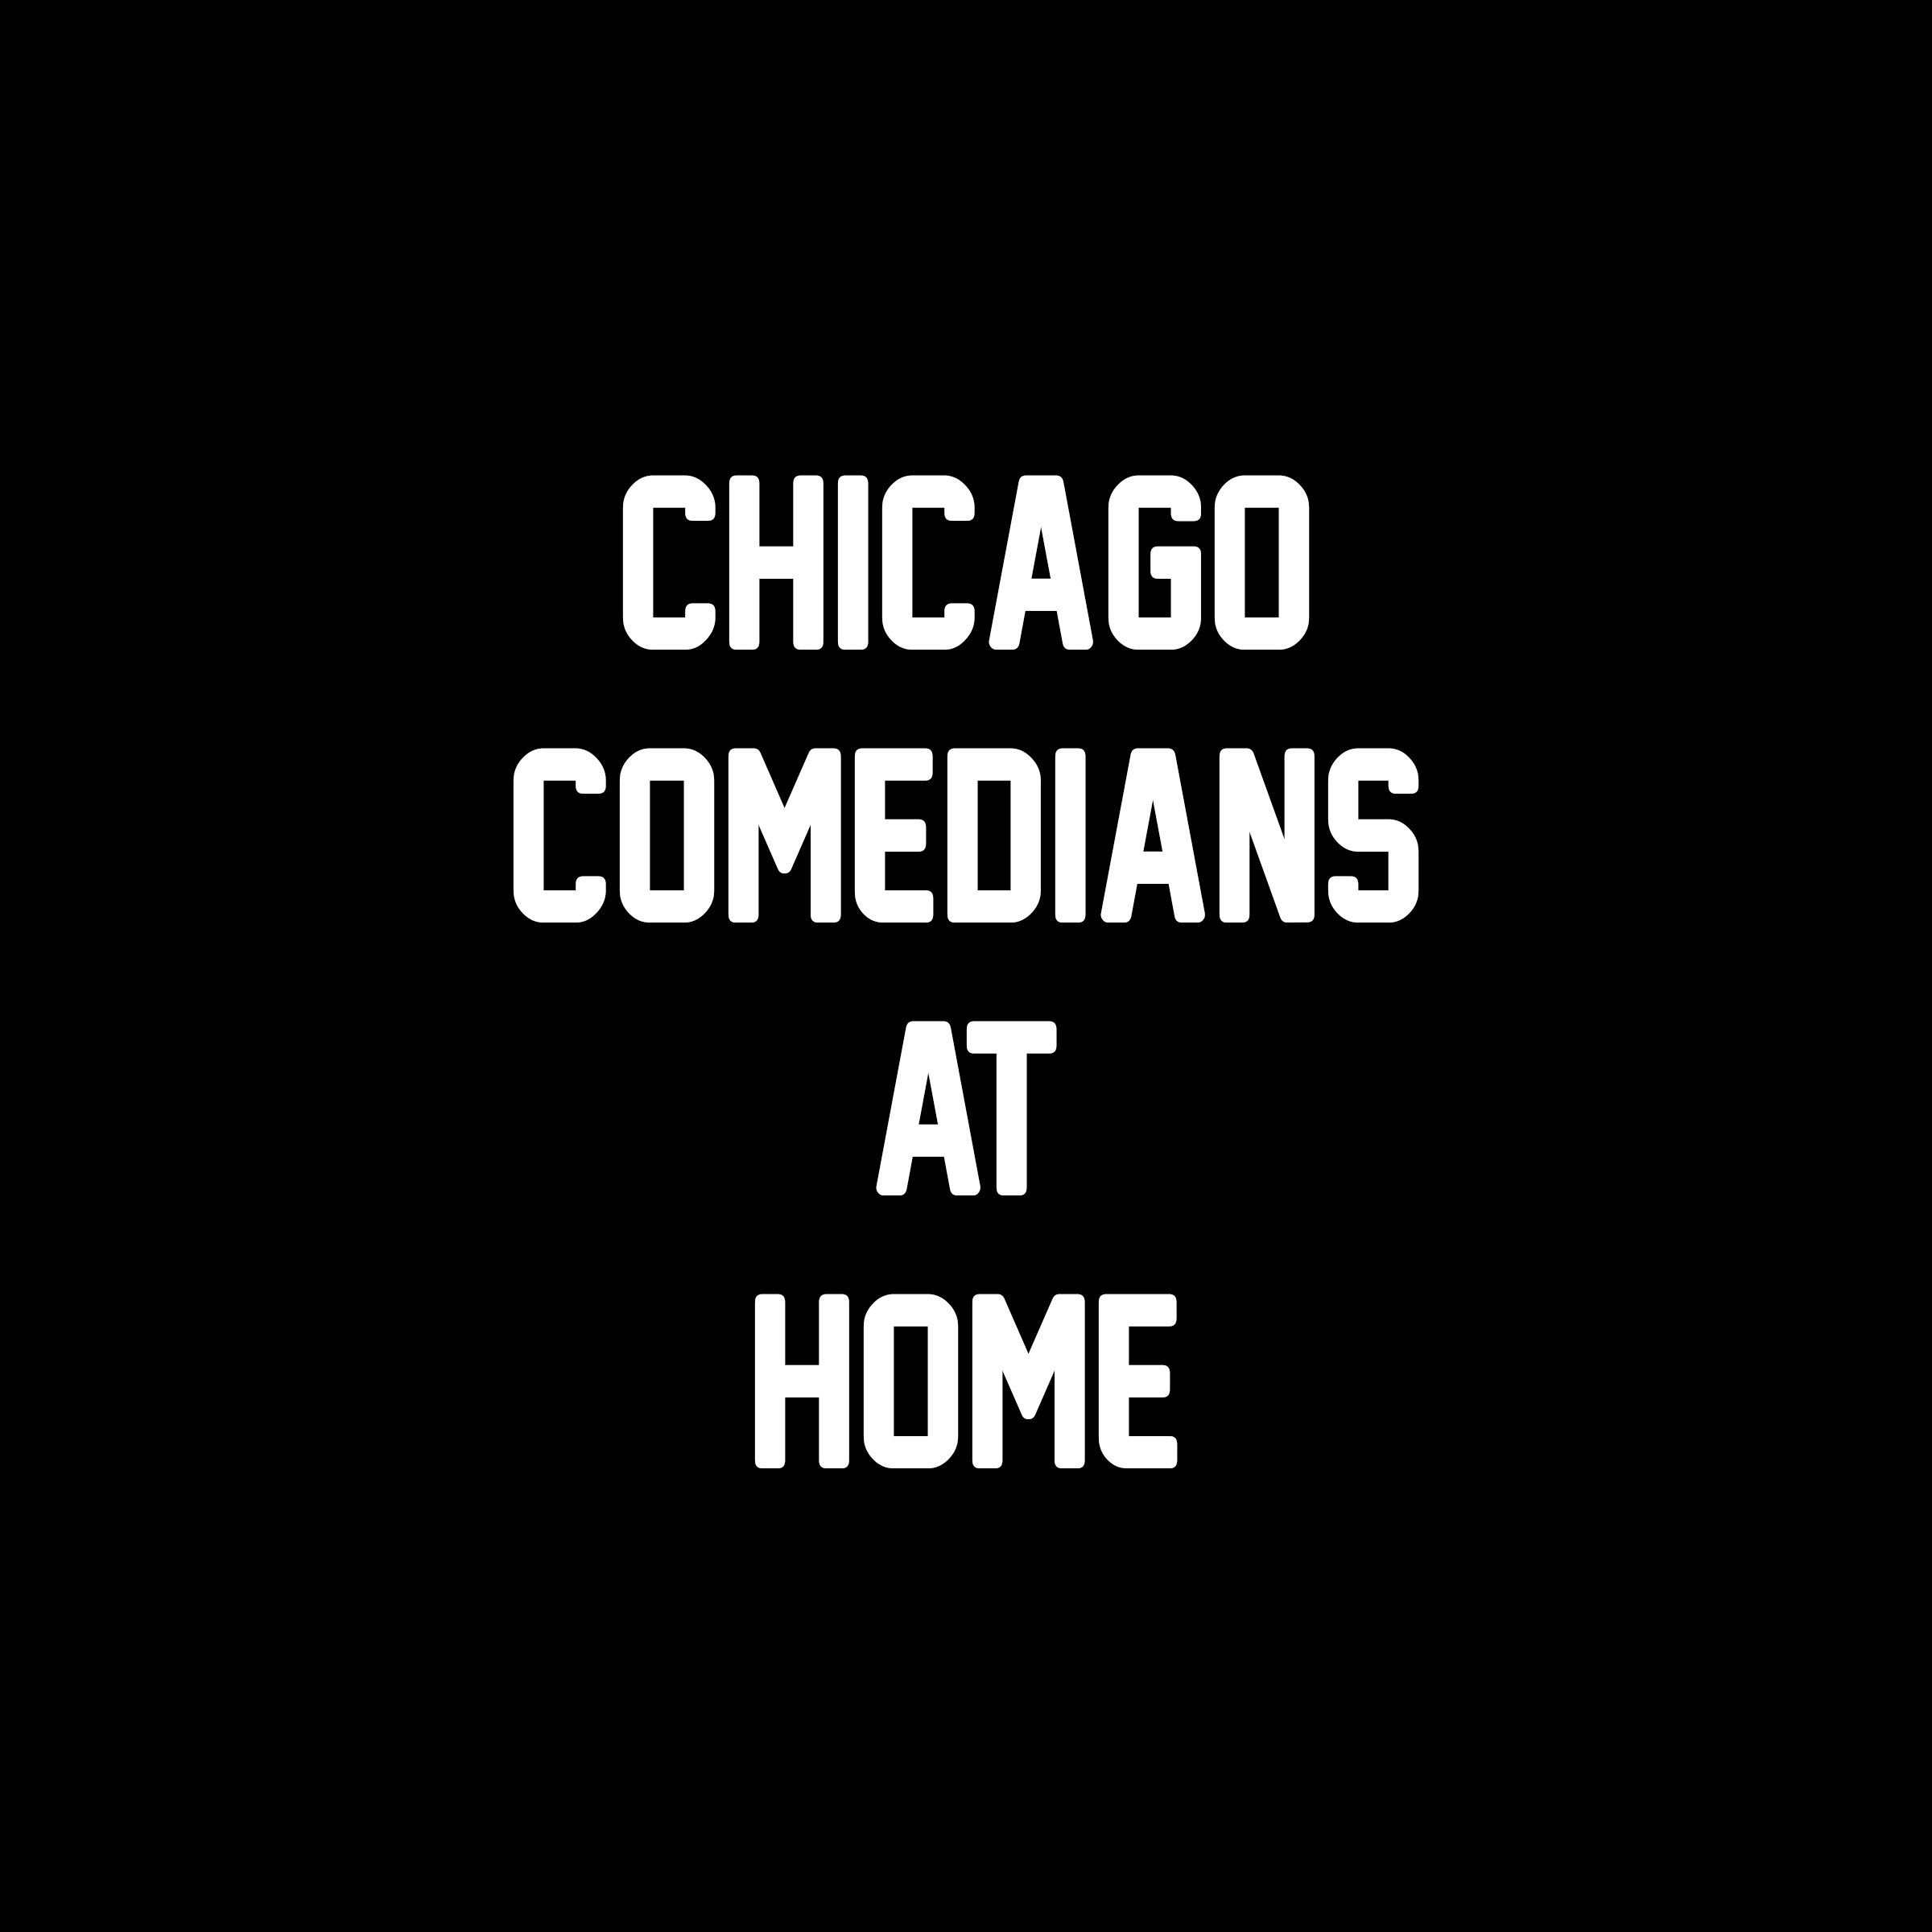 Chicago Comedians at Home copy.png